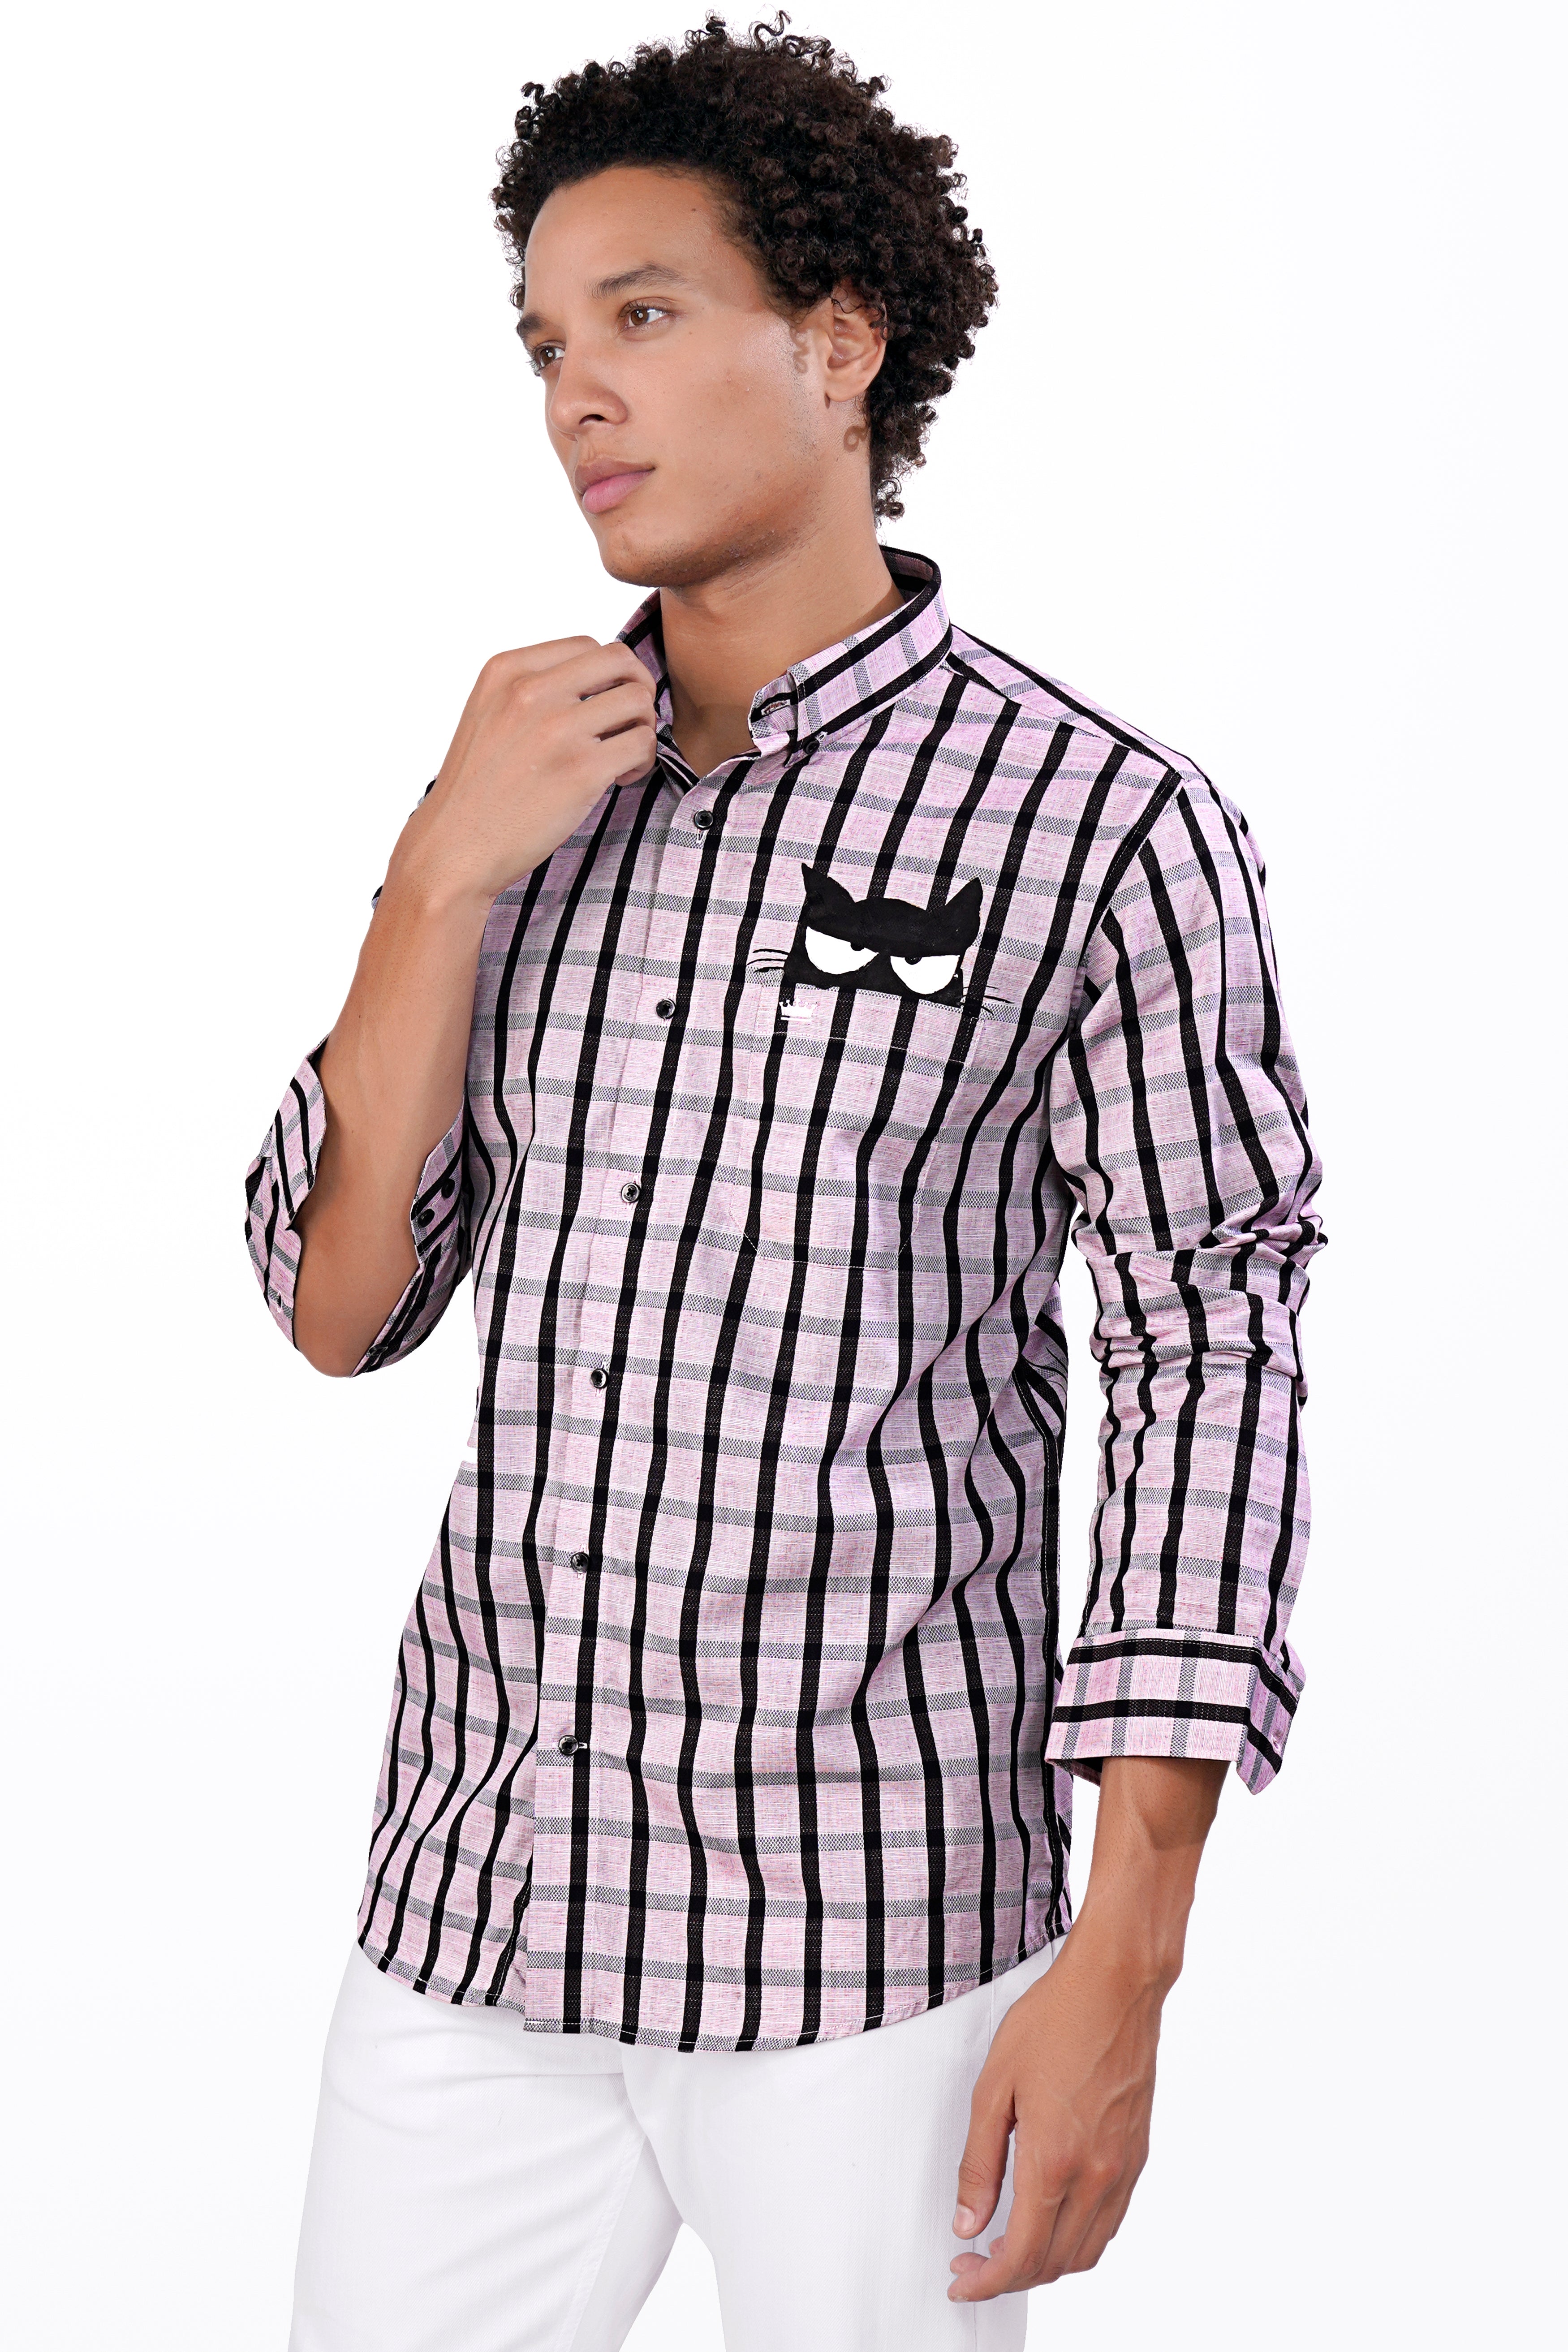 Mauve Pink with Black Striped and Cat Hand Painted Dobby Premium Giza Cotton Designer Shirt 7627-BD-BLK-ART-38, 7627-BD-BLK-ART-H-38, 7627-BD-BLK-ART-39, 7627-BD-BLK-ART-H-39, 7627-BD-BLK-ART-40, 7627-BD-BLK-ART-H-40, 7627-BD-BLK-ART-42, 7627-BD-BLK-ART-H-42, 7627-BD-BLK-ART-44, 7627-BD-BLK-ART-H-44, 7627-BD-BLK-ART-46, 7627-BD-BLK-ART-H-46, 7627-BD-BLK-ART-48, 7627-BD-BLK-ART-H-48, 7627-BD-BLK-ART-50, 7627-BD-BLK-ART-H-50, 7627-BD-BLK-ART-52, 7627-BD-BLK-ART-H-52